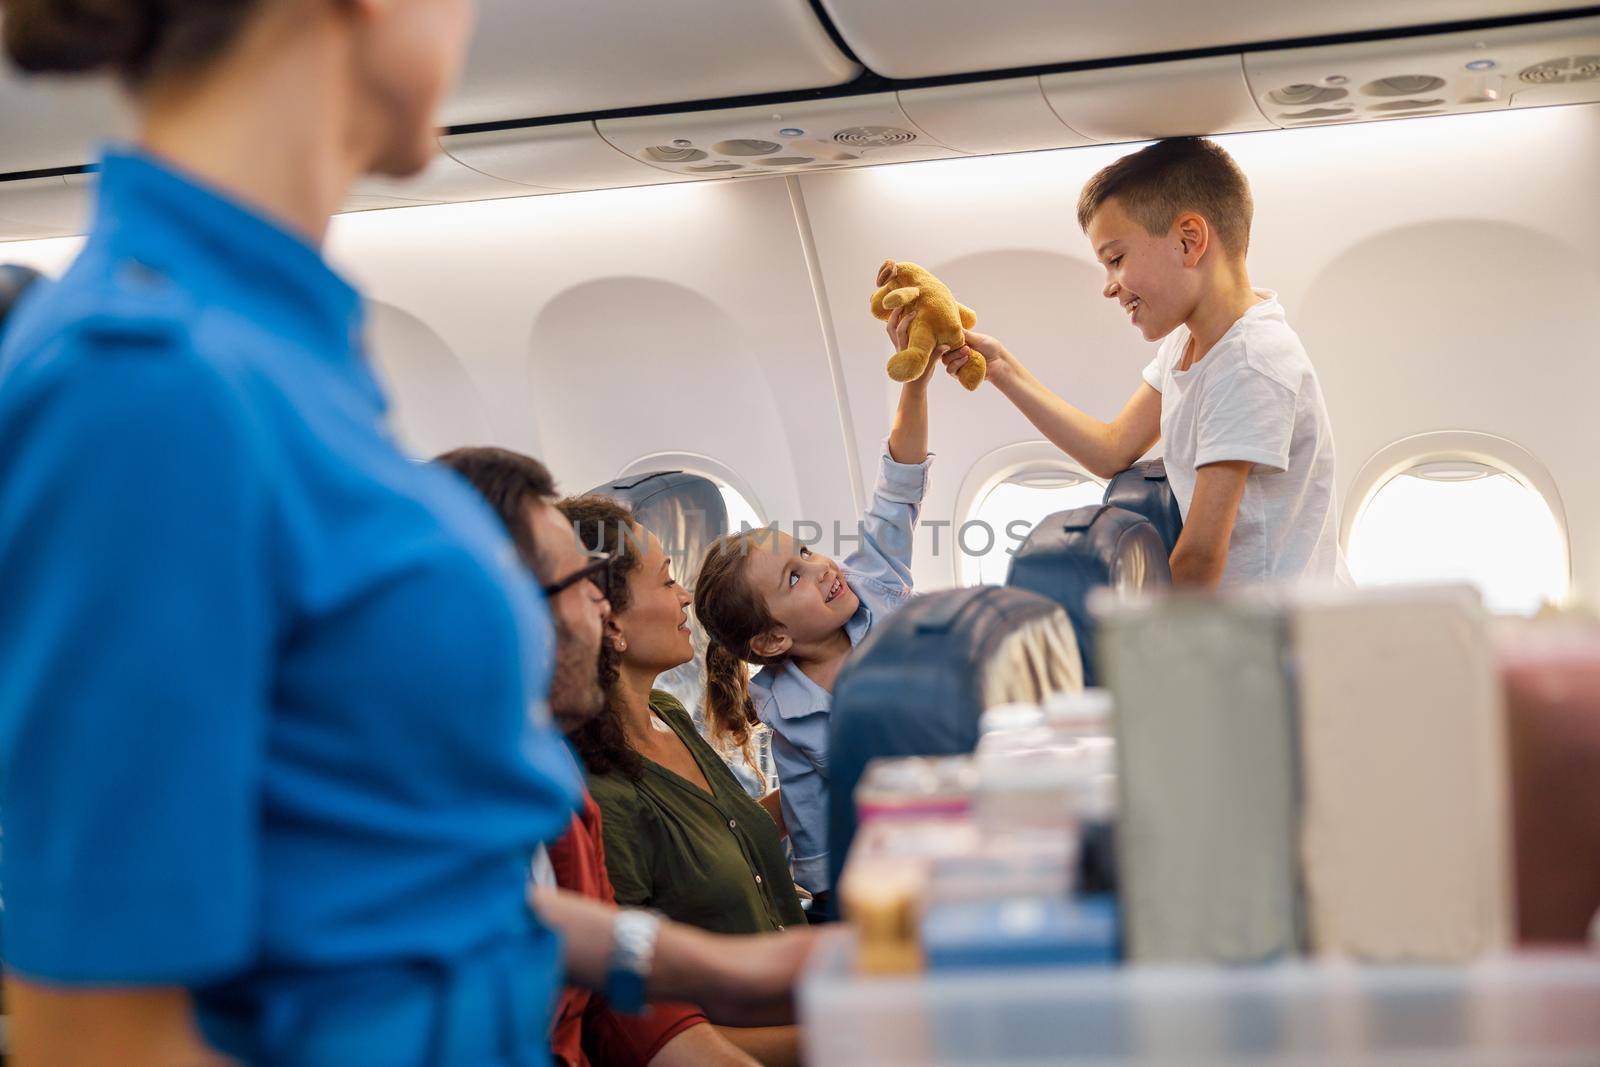 Two happy kids playing with a toy during flight. Family traveling together by plane. Vacation, travel, airline, service concept